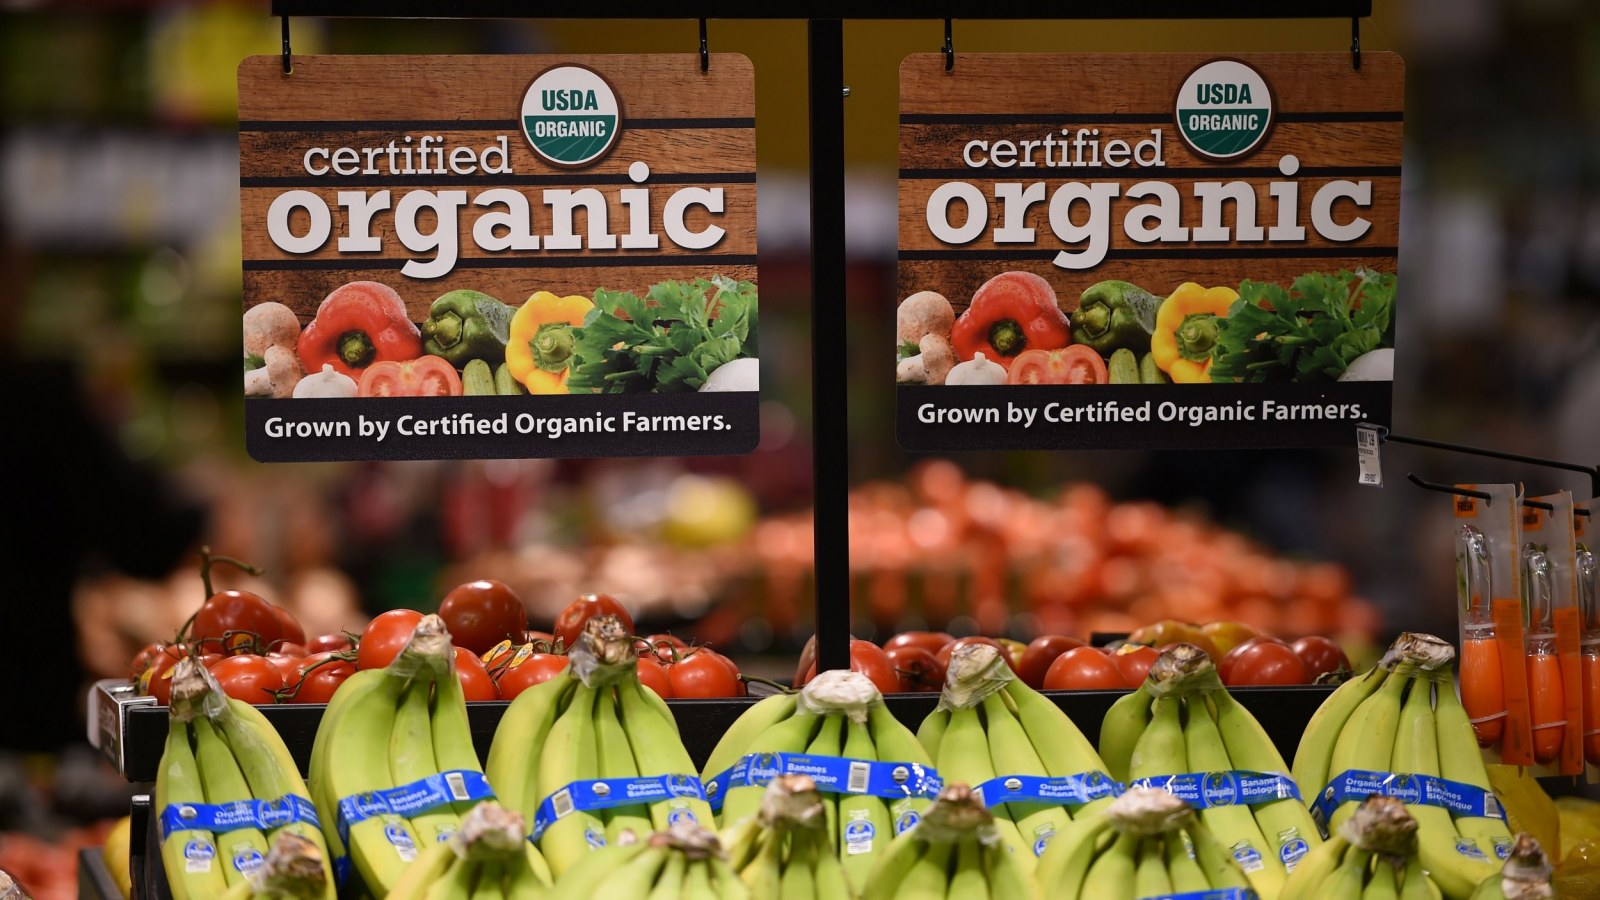 Organic food by Getty Images